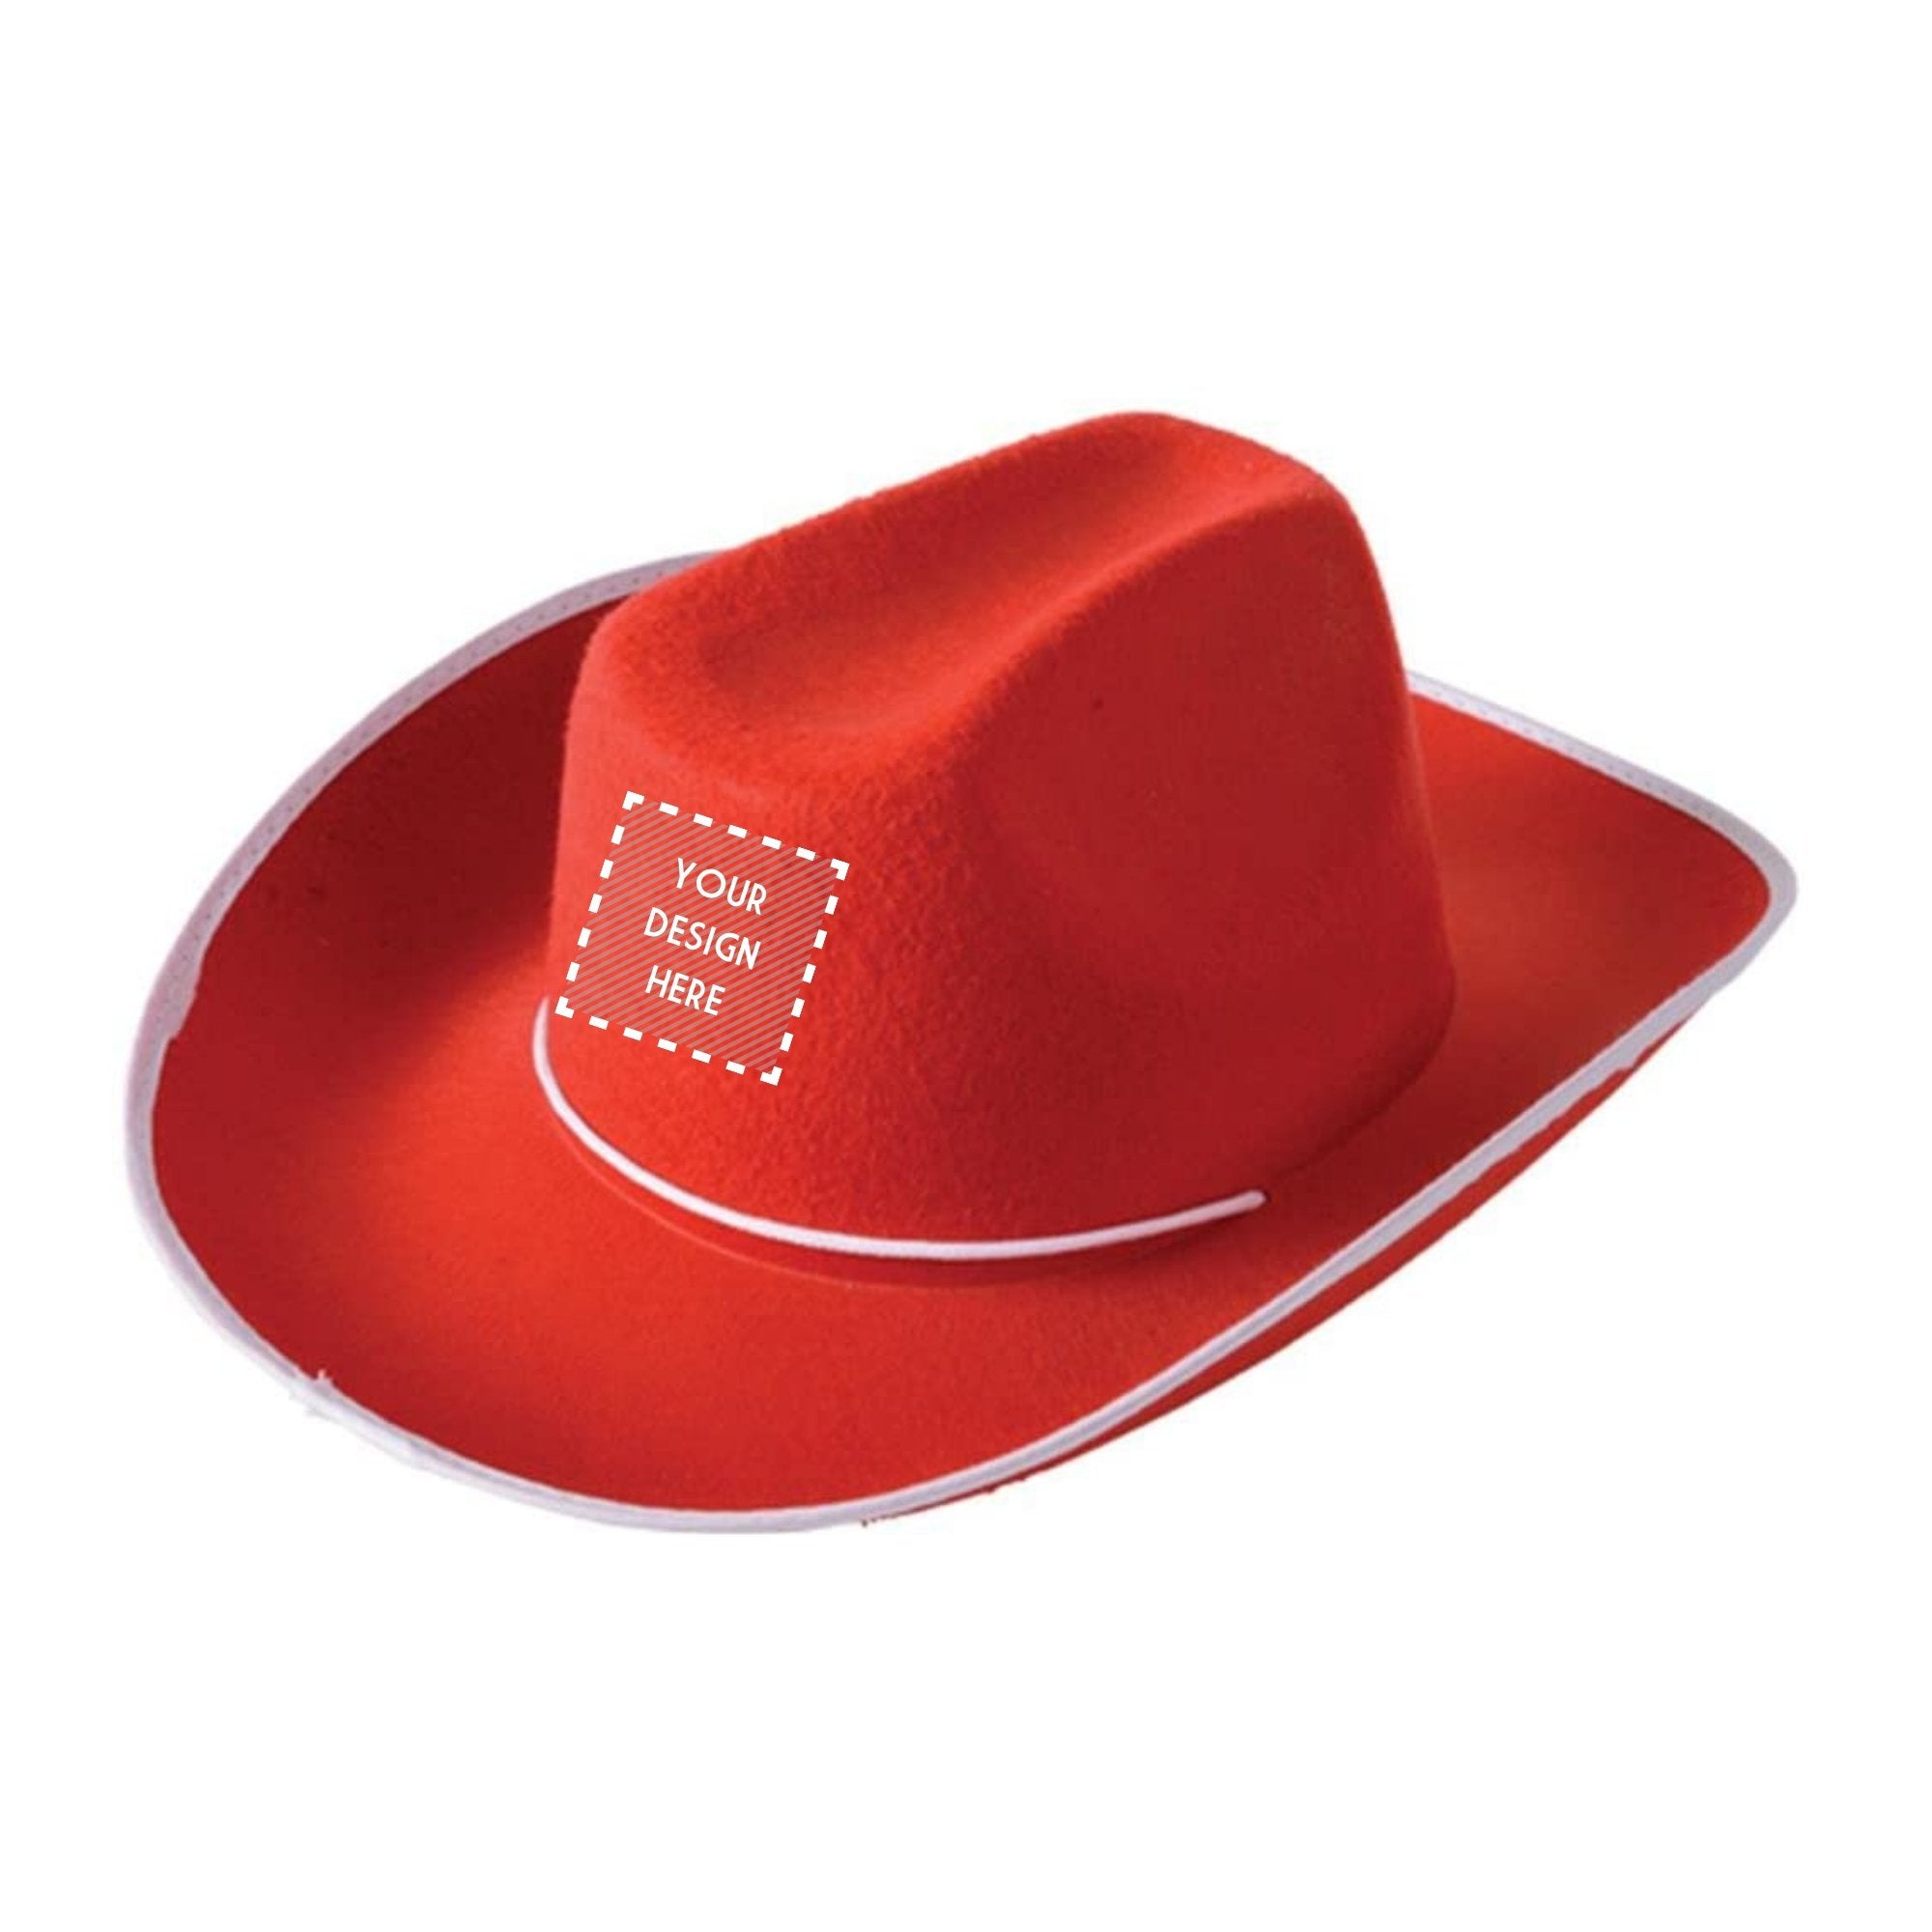 A black cowboy hat that has a customizable area on the front